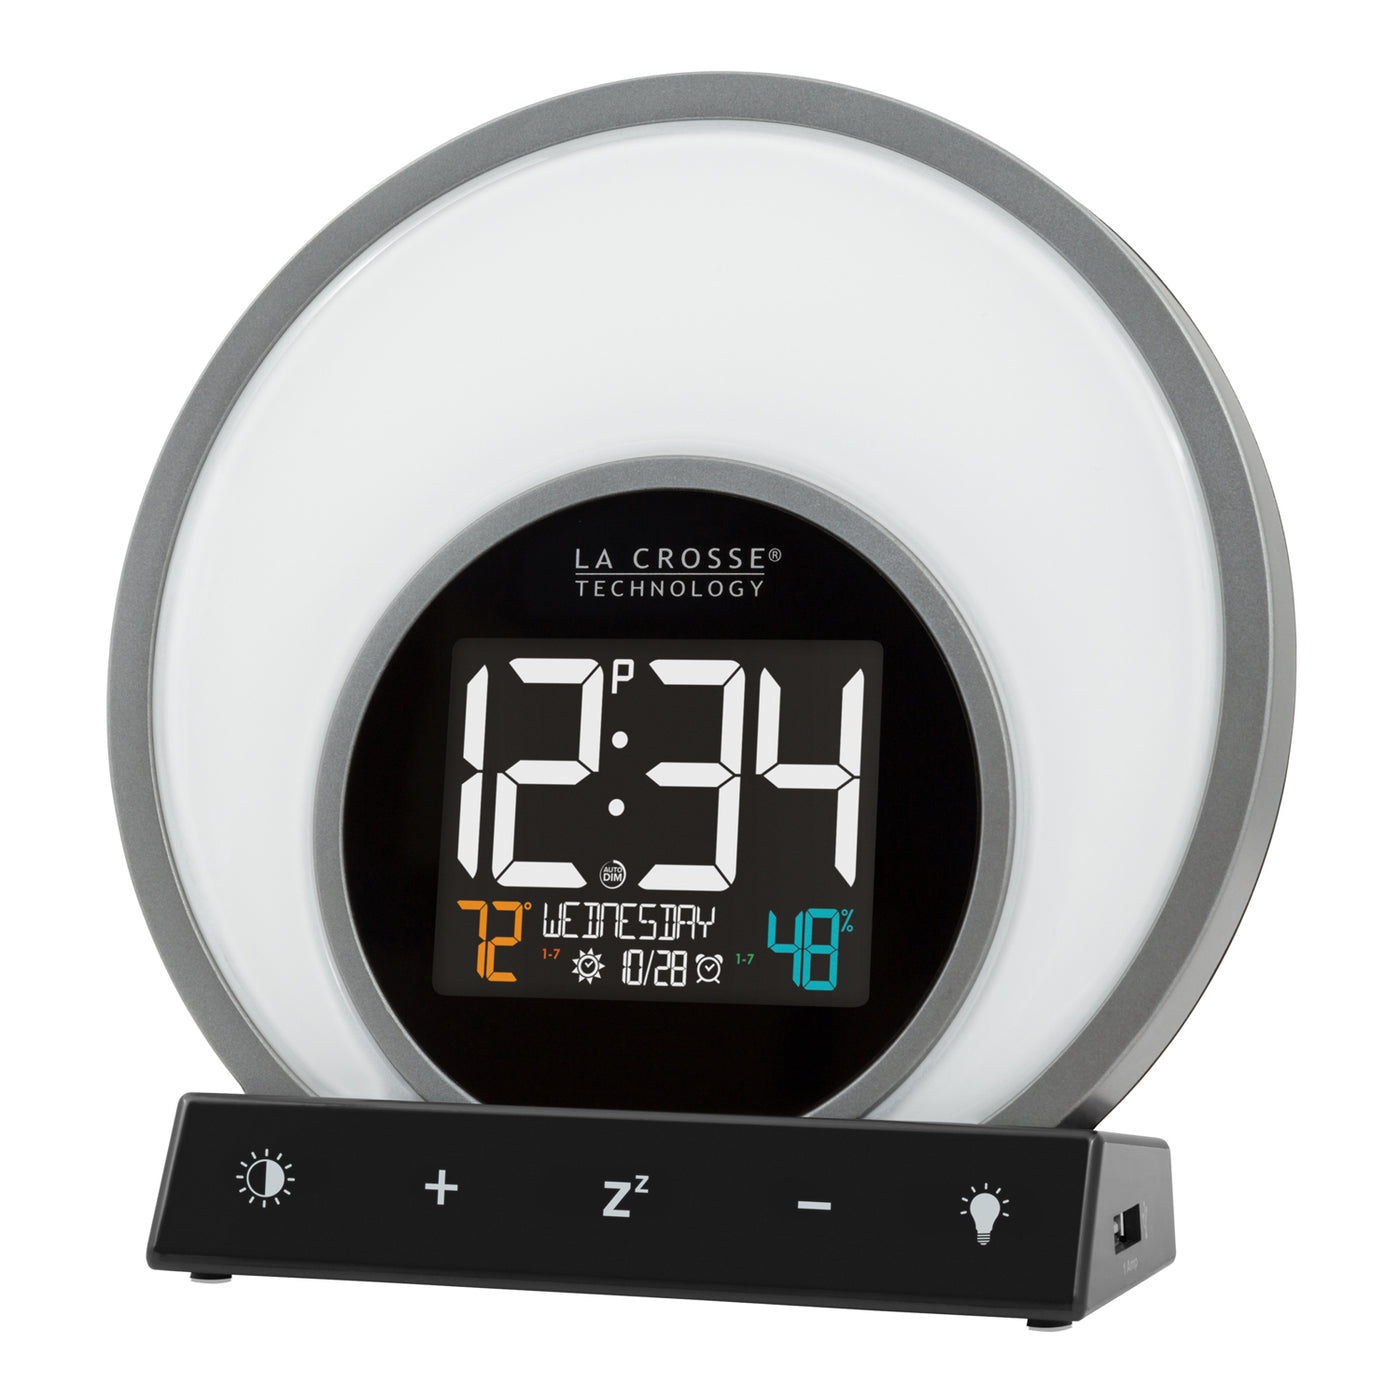 La Crosse Technology Digital White Wall Clock with Temperature and